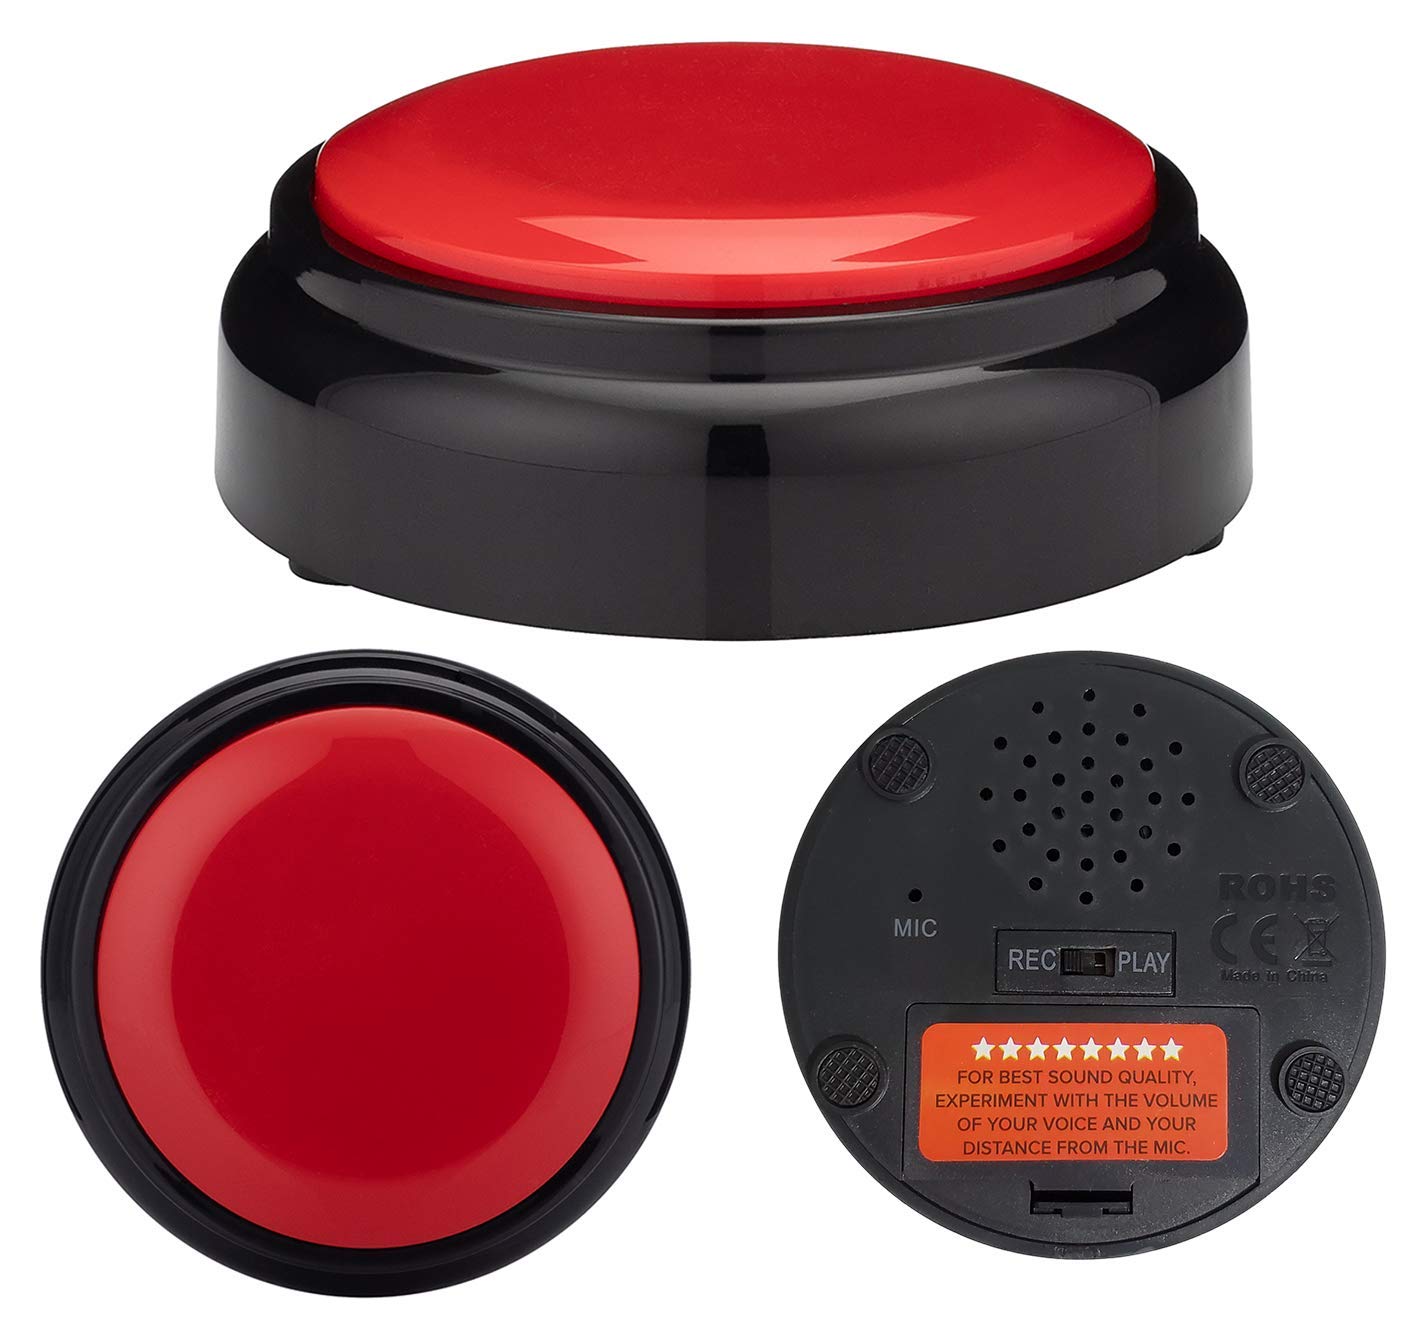 Inventiv 30 Second Custom Recordable Talking Button, Record & Playback Your Own Message, Quality Voice Sound Recorder - 15 Phrase Stickers Included (Red)